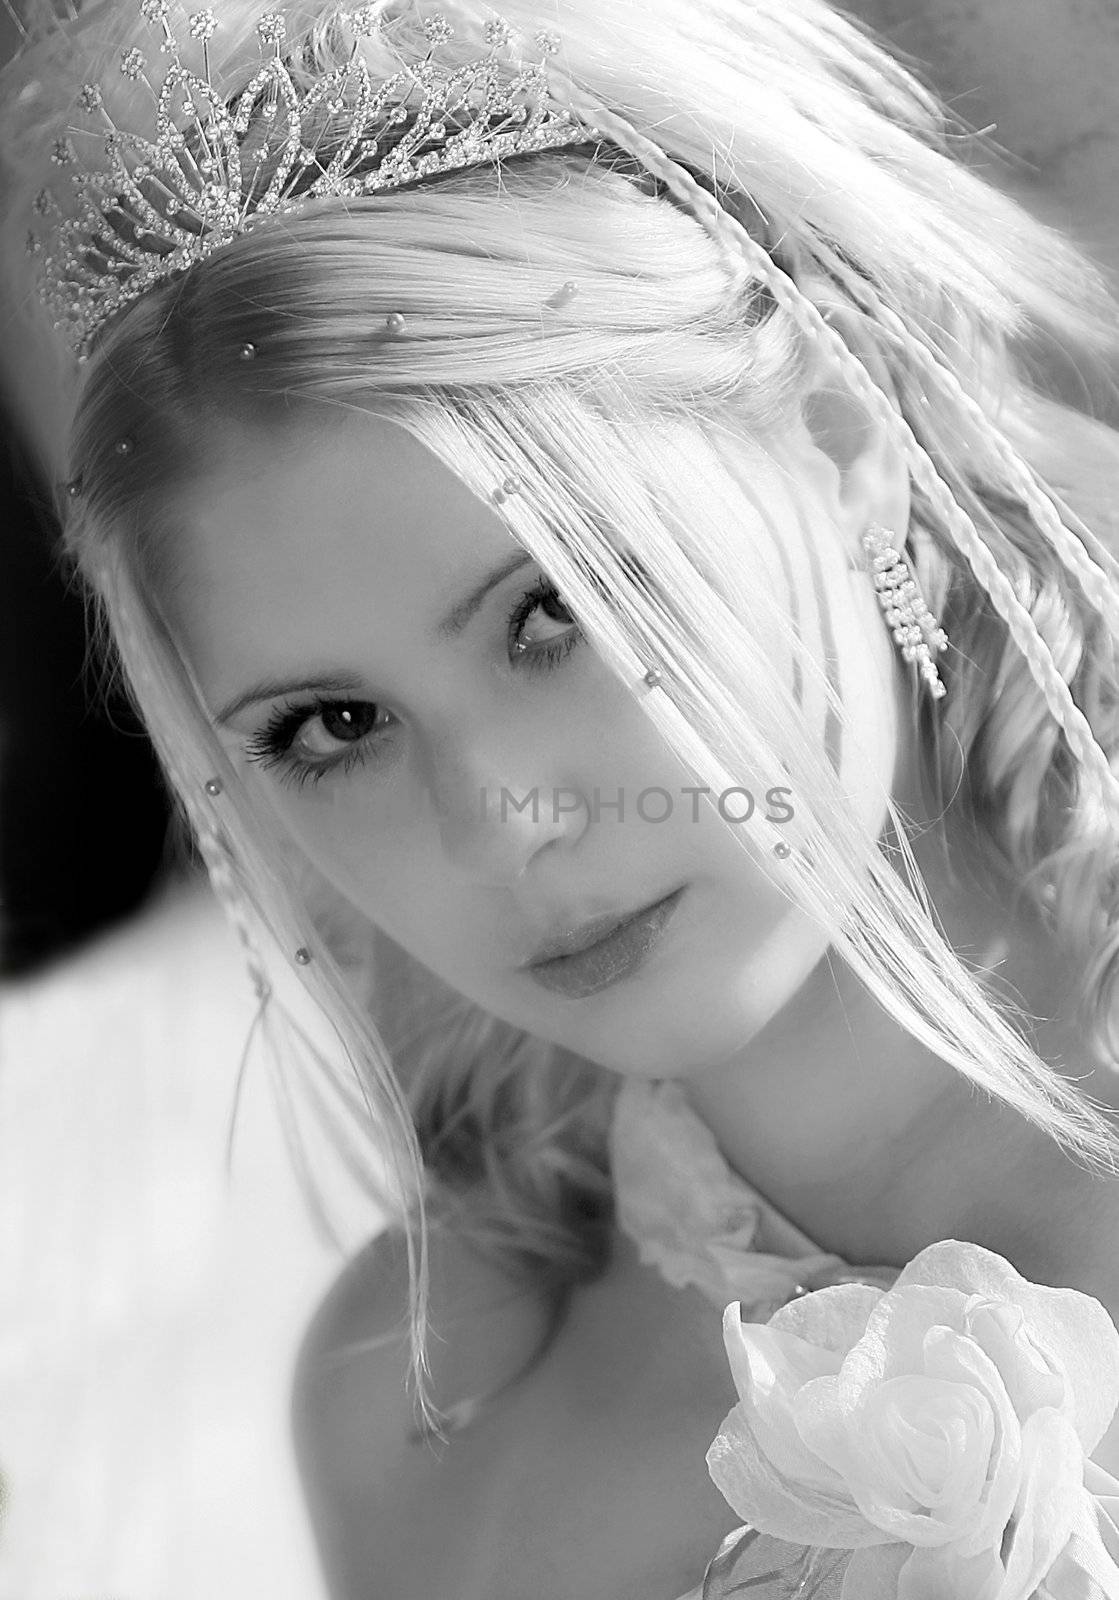 Portrait of beautiful young blond haired bride on wedding day wearing tiara.